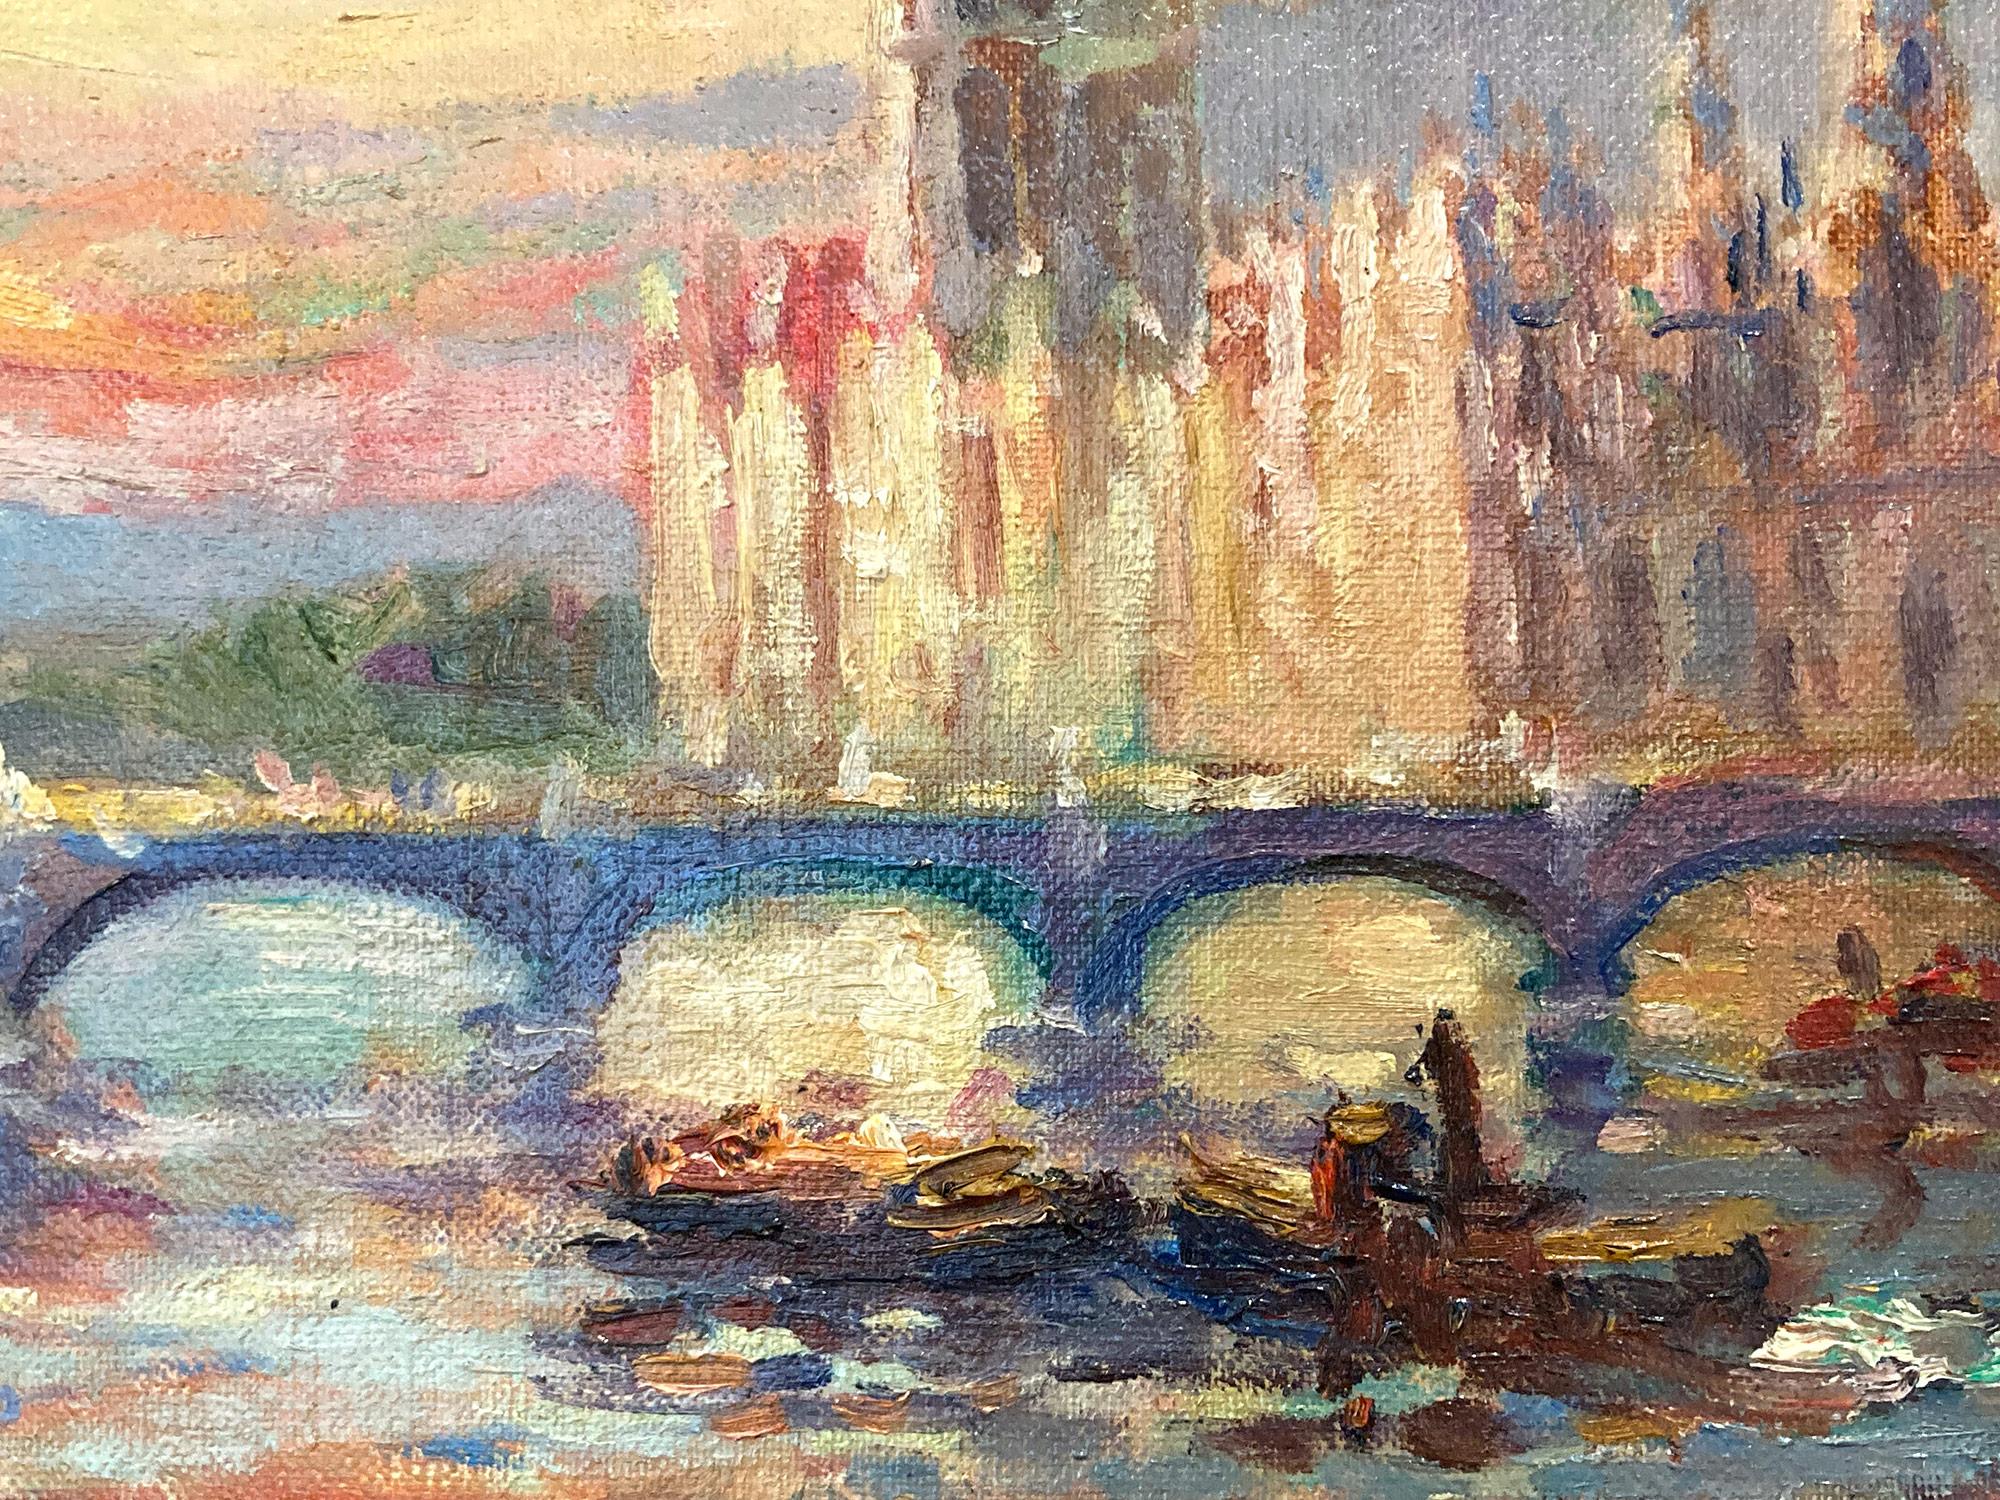 This piece is a pertinent example of Lucian Rampazo most sought after works, depicting the Westminster Abbey. As an Italian Impressionist artist, most of Rampazo's works were produced in the 20th Century, between 1950 - 1990. He was known for his